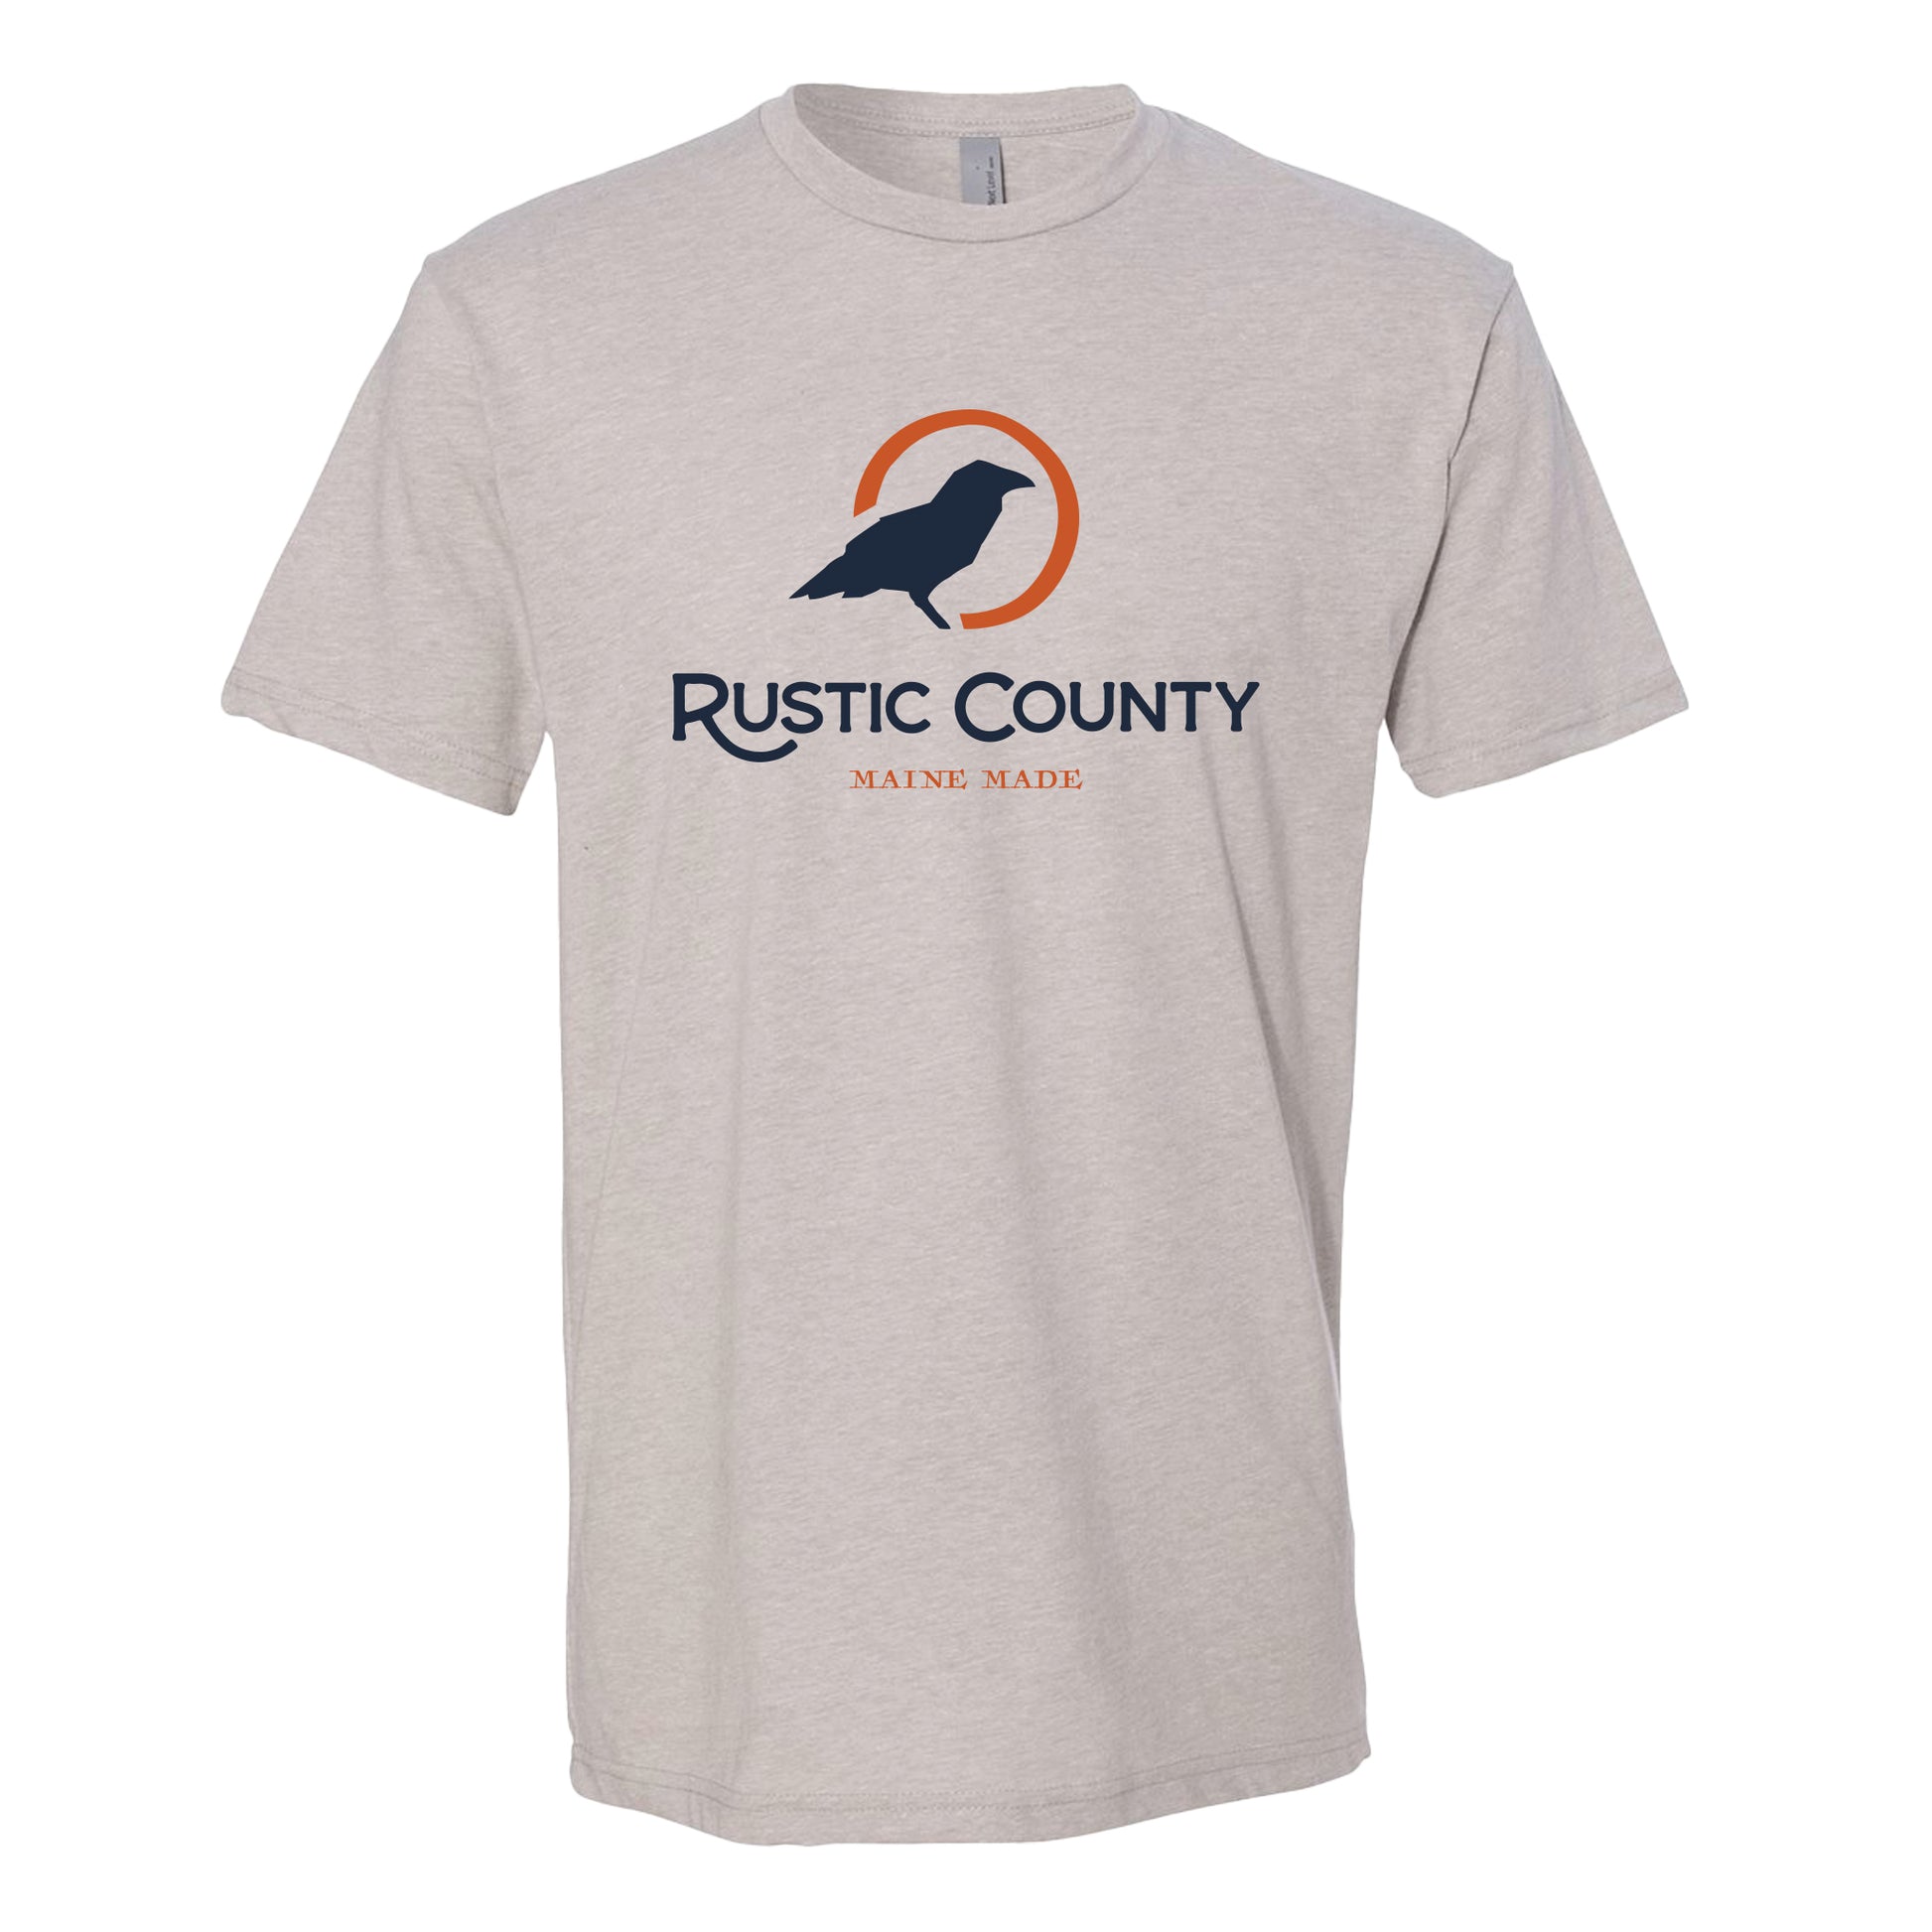 A lightweight fit, light gray Rustic County unisex short sleeve t-shirt with the logo "rustic county maine made" featuring a stylized bird in blue and orange colors on the chest area.